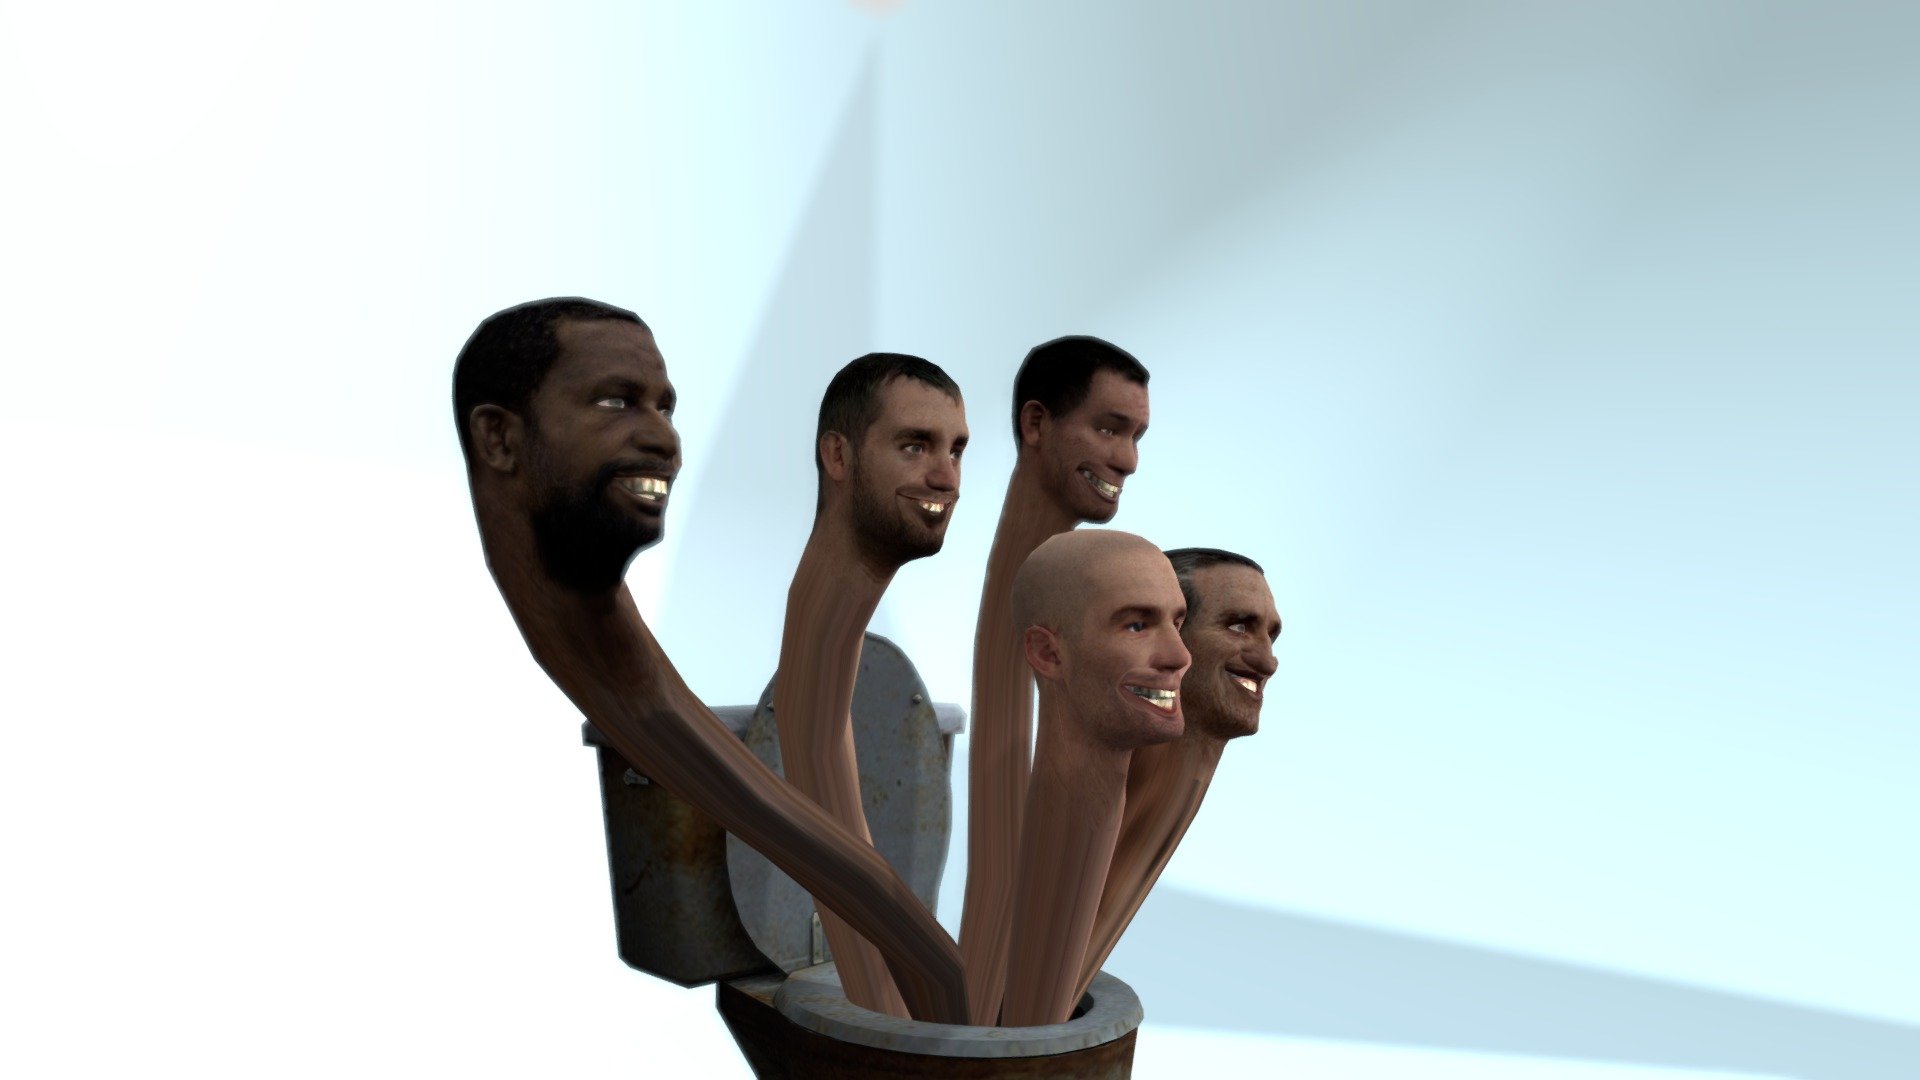 skibidi toilet (toilet mens) from skibidi toilet meme from youtube, the model is fully rigged and it's ready to animate. feel free to ask any thing and be creative with it. the skibidi videos is already getting millions of views :) enjoyyyy . 3d model